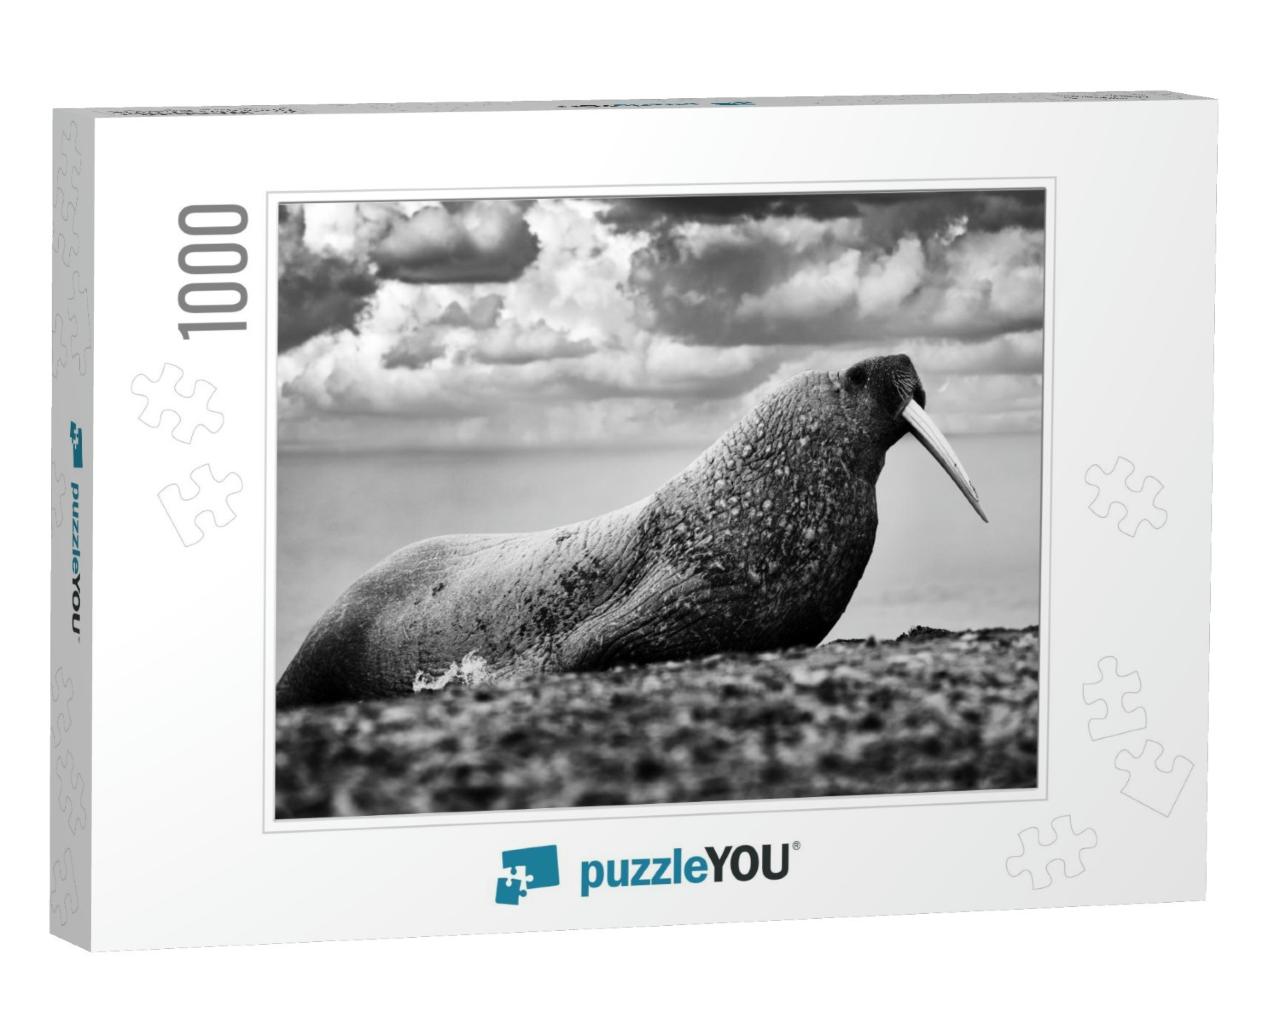 Nature - Black & White Art. Walrus on the Sand Beach. Det... Jigsaw Puzzle with 1000 pieces